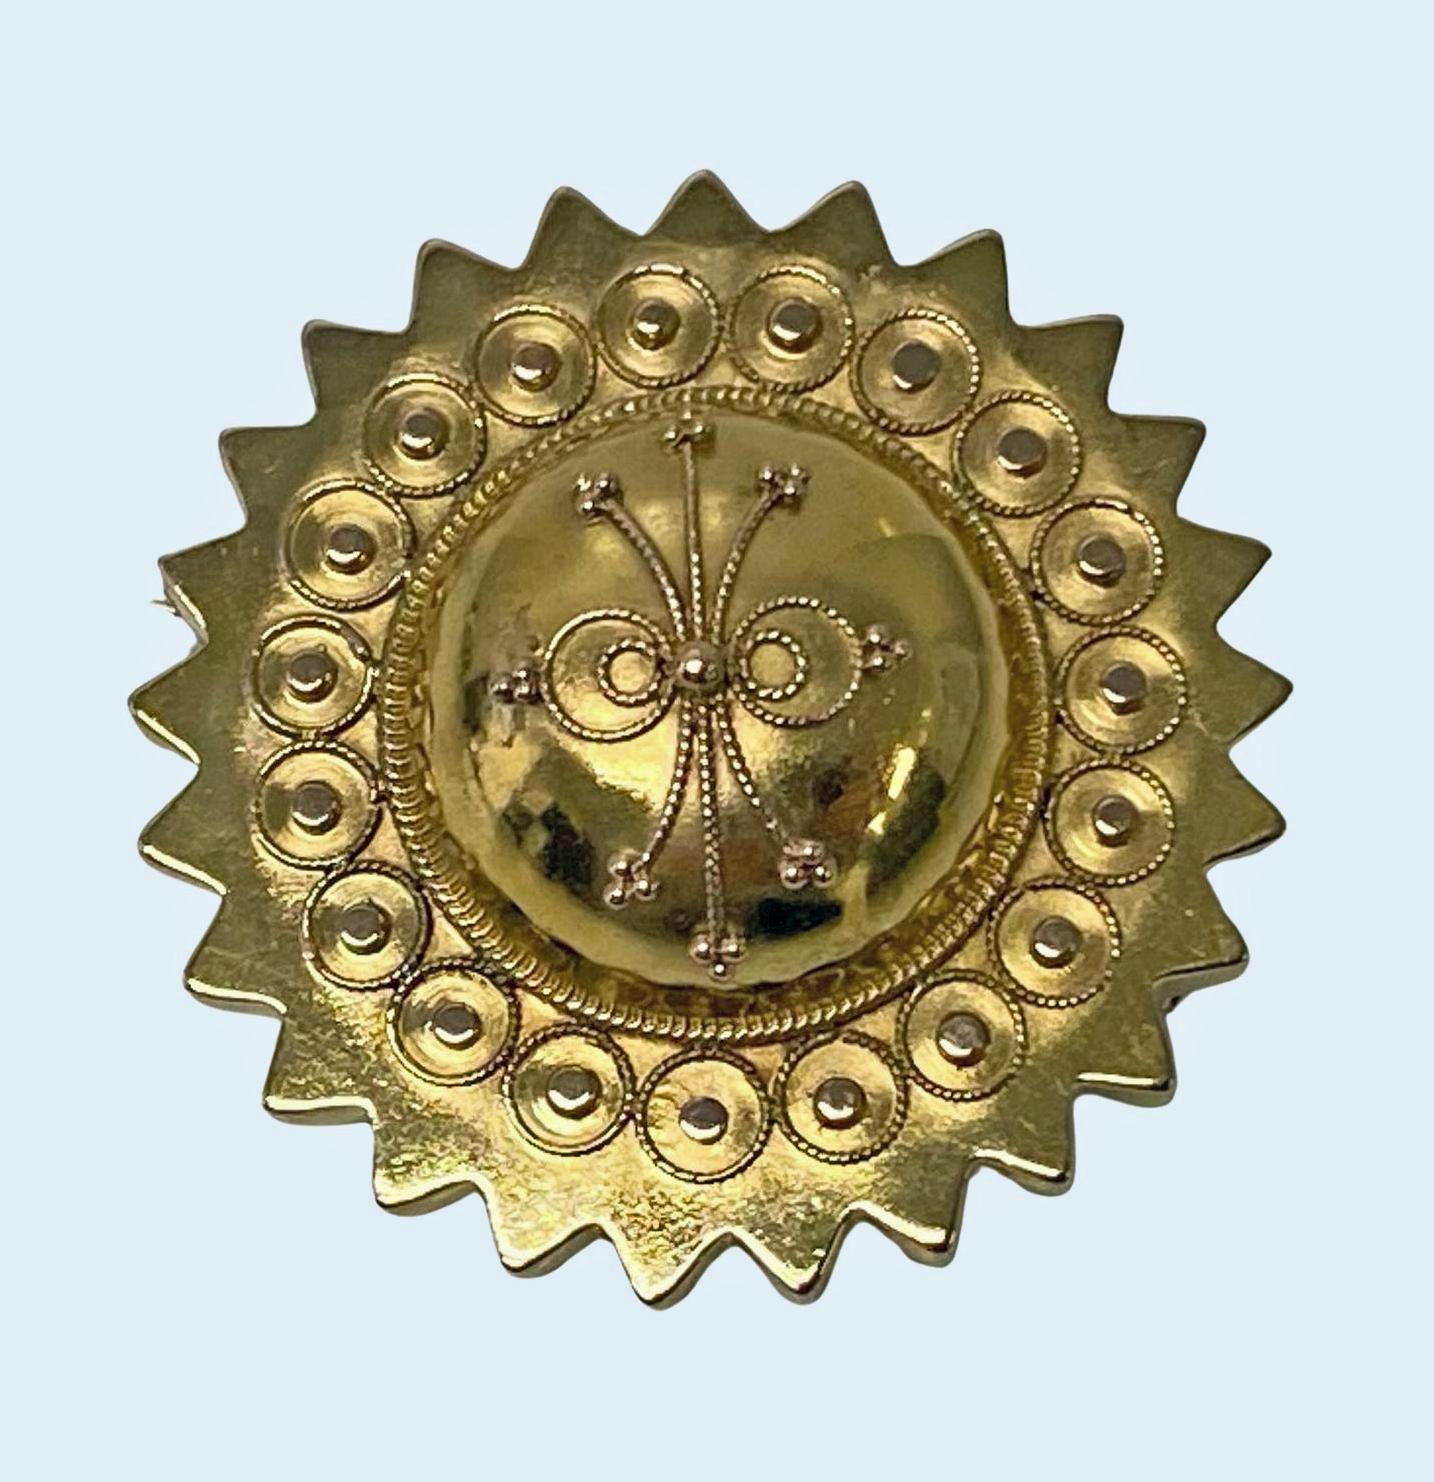 Antique Victorian 15K gold brooch, English C.1870. The brooch centering a dome with estruscan decoration surround of bead rondelle circlets and outer star border. Locket to reverse. Later safety catch fitment. Acid tested as 15K gold. 35mm Diameter,